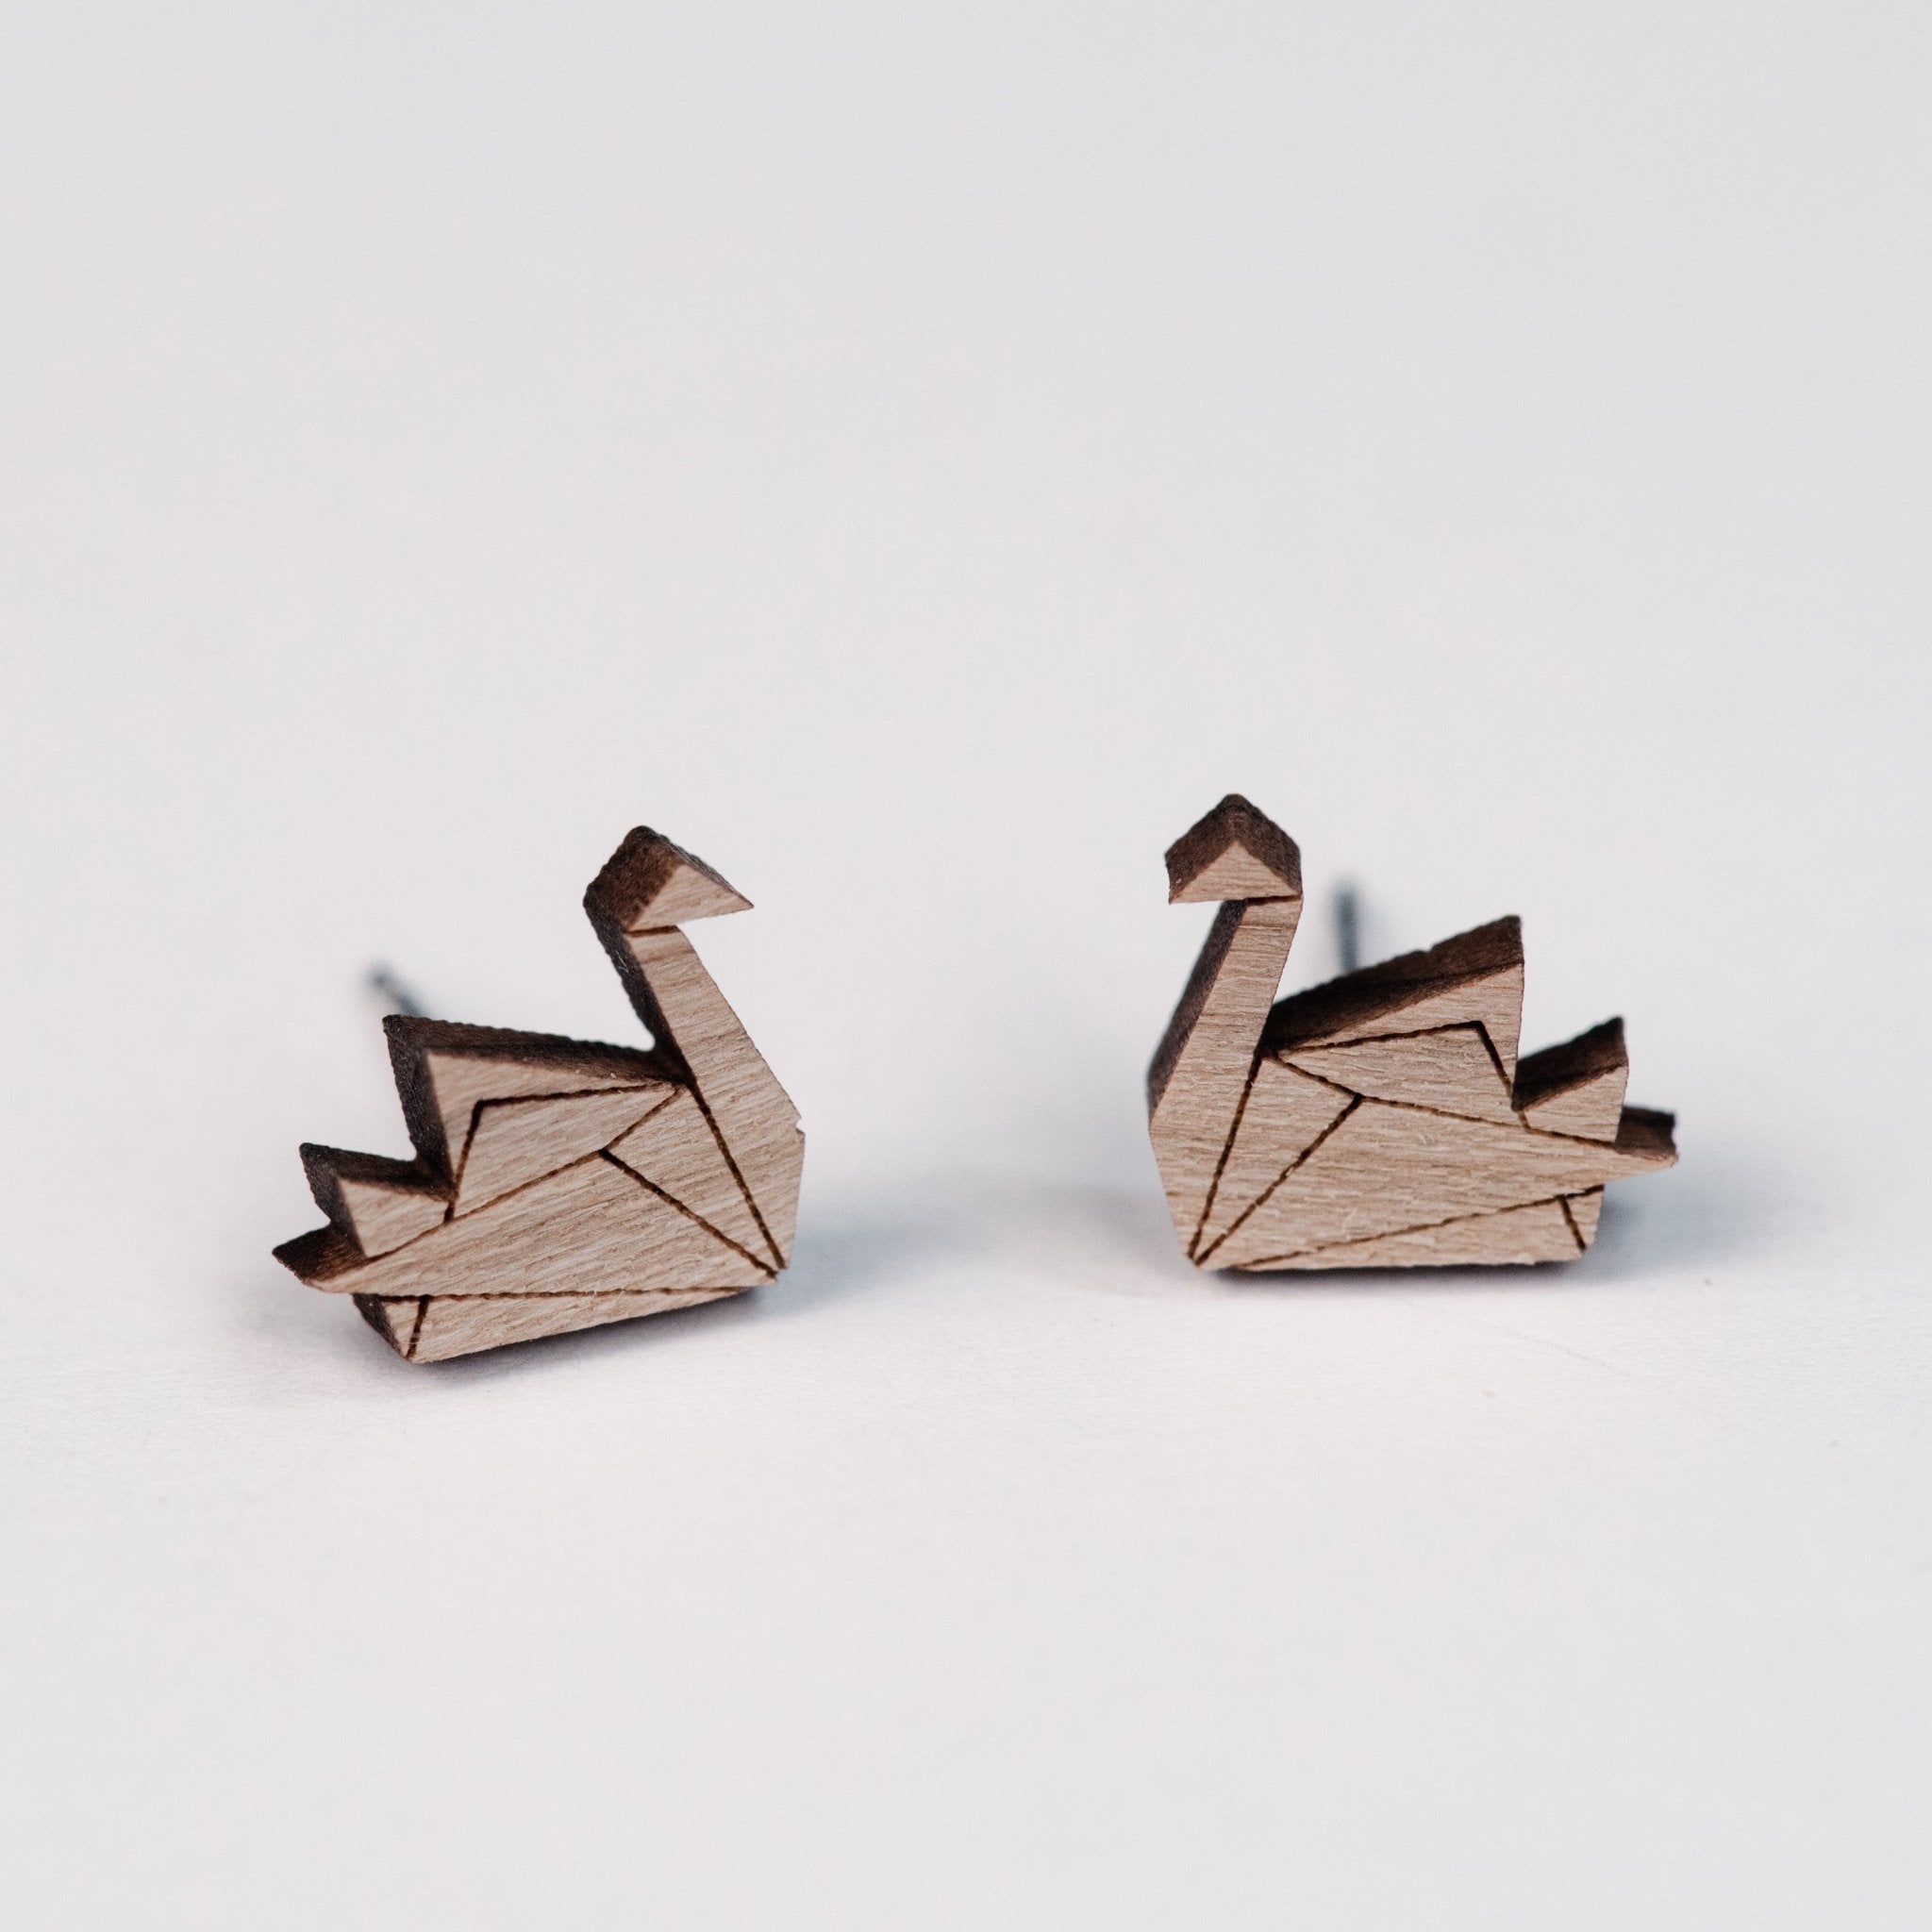 Origami Swan Cherry Wood Stud Earrings - EB12013 - Robin Valley Official Store